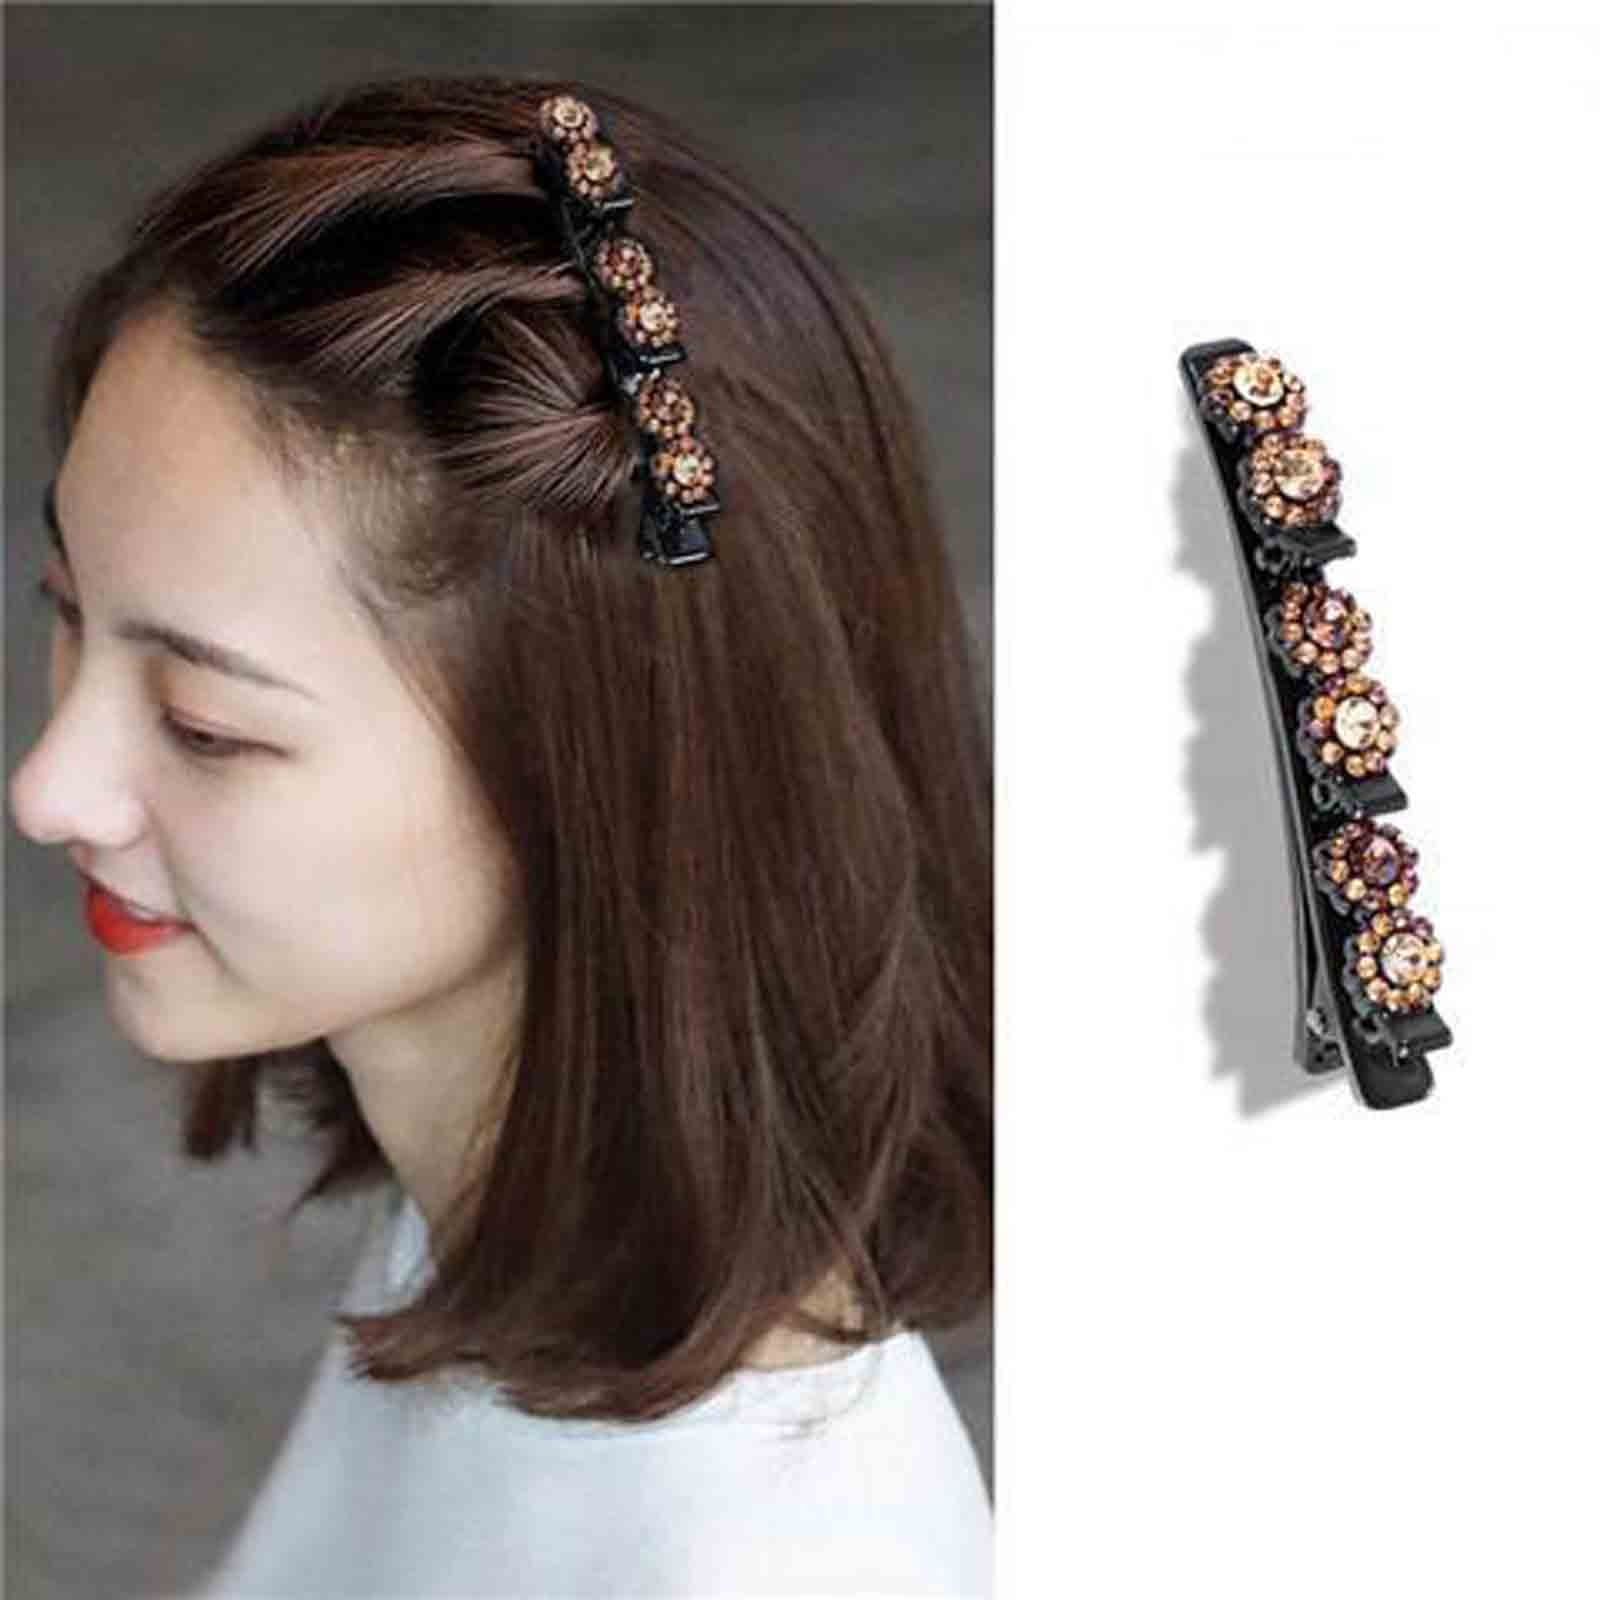 Pompotops Sparkling Crystal Stone Braided Hair Clips For Women Girls Hair  Barrettes with 3 Small Clips 6 Rhinestone Duckbill Clip Hair Accessories 